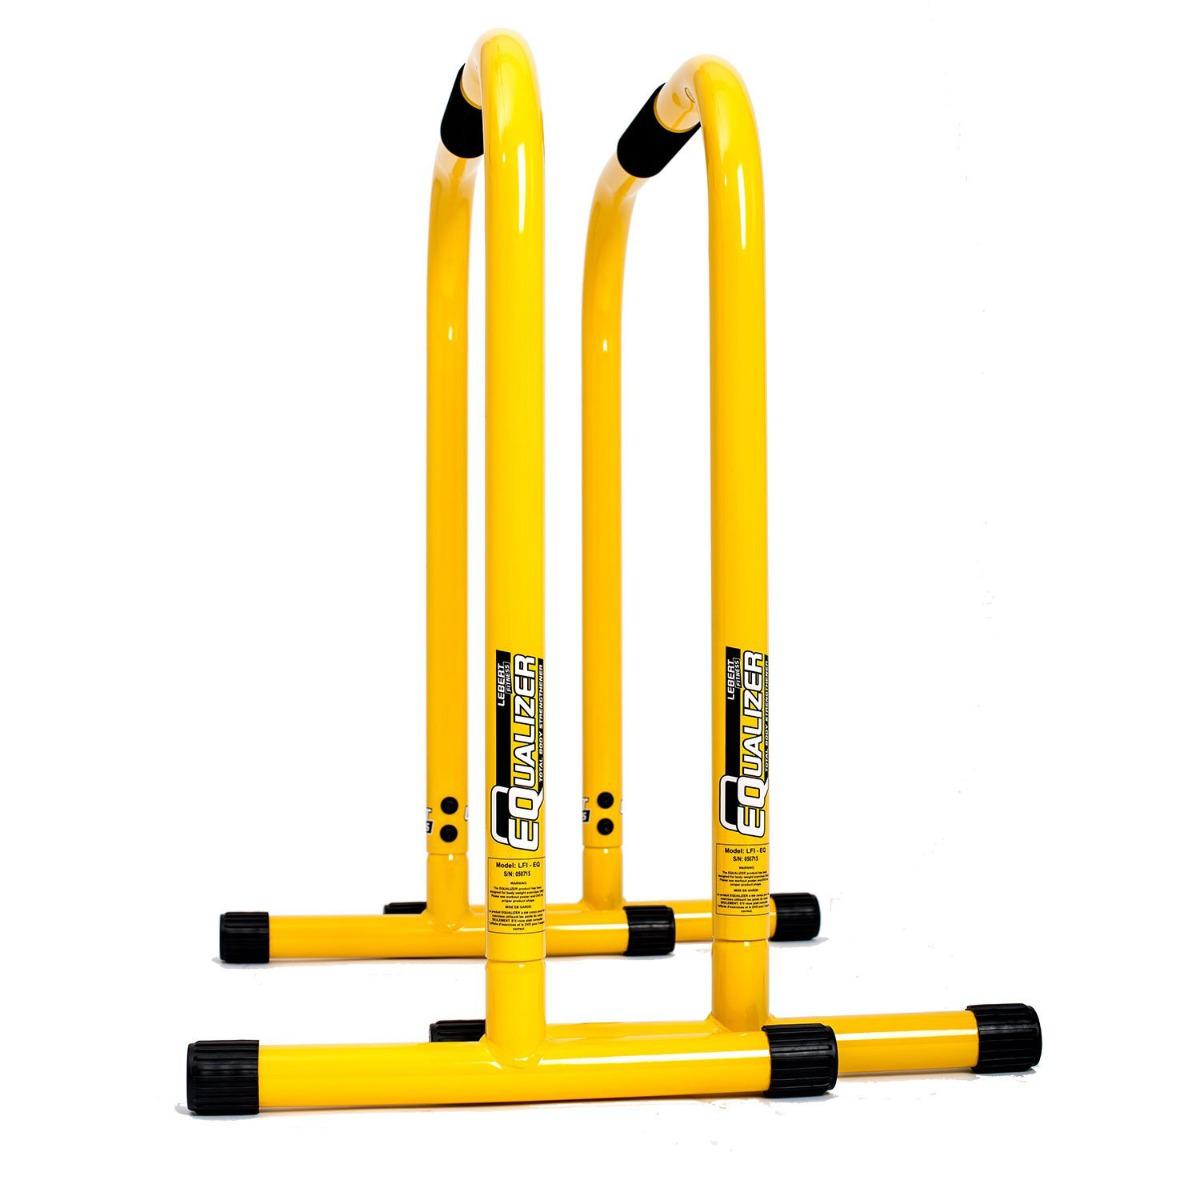 Lebert Equalizer Total Body Strengthener - Yellow-Equalizer & Parallettes-Pro Sports